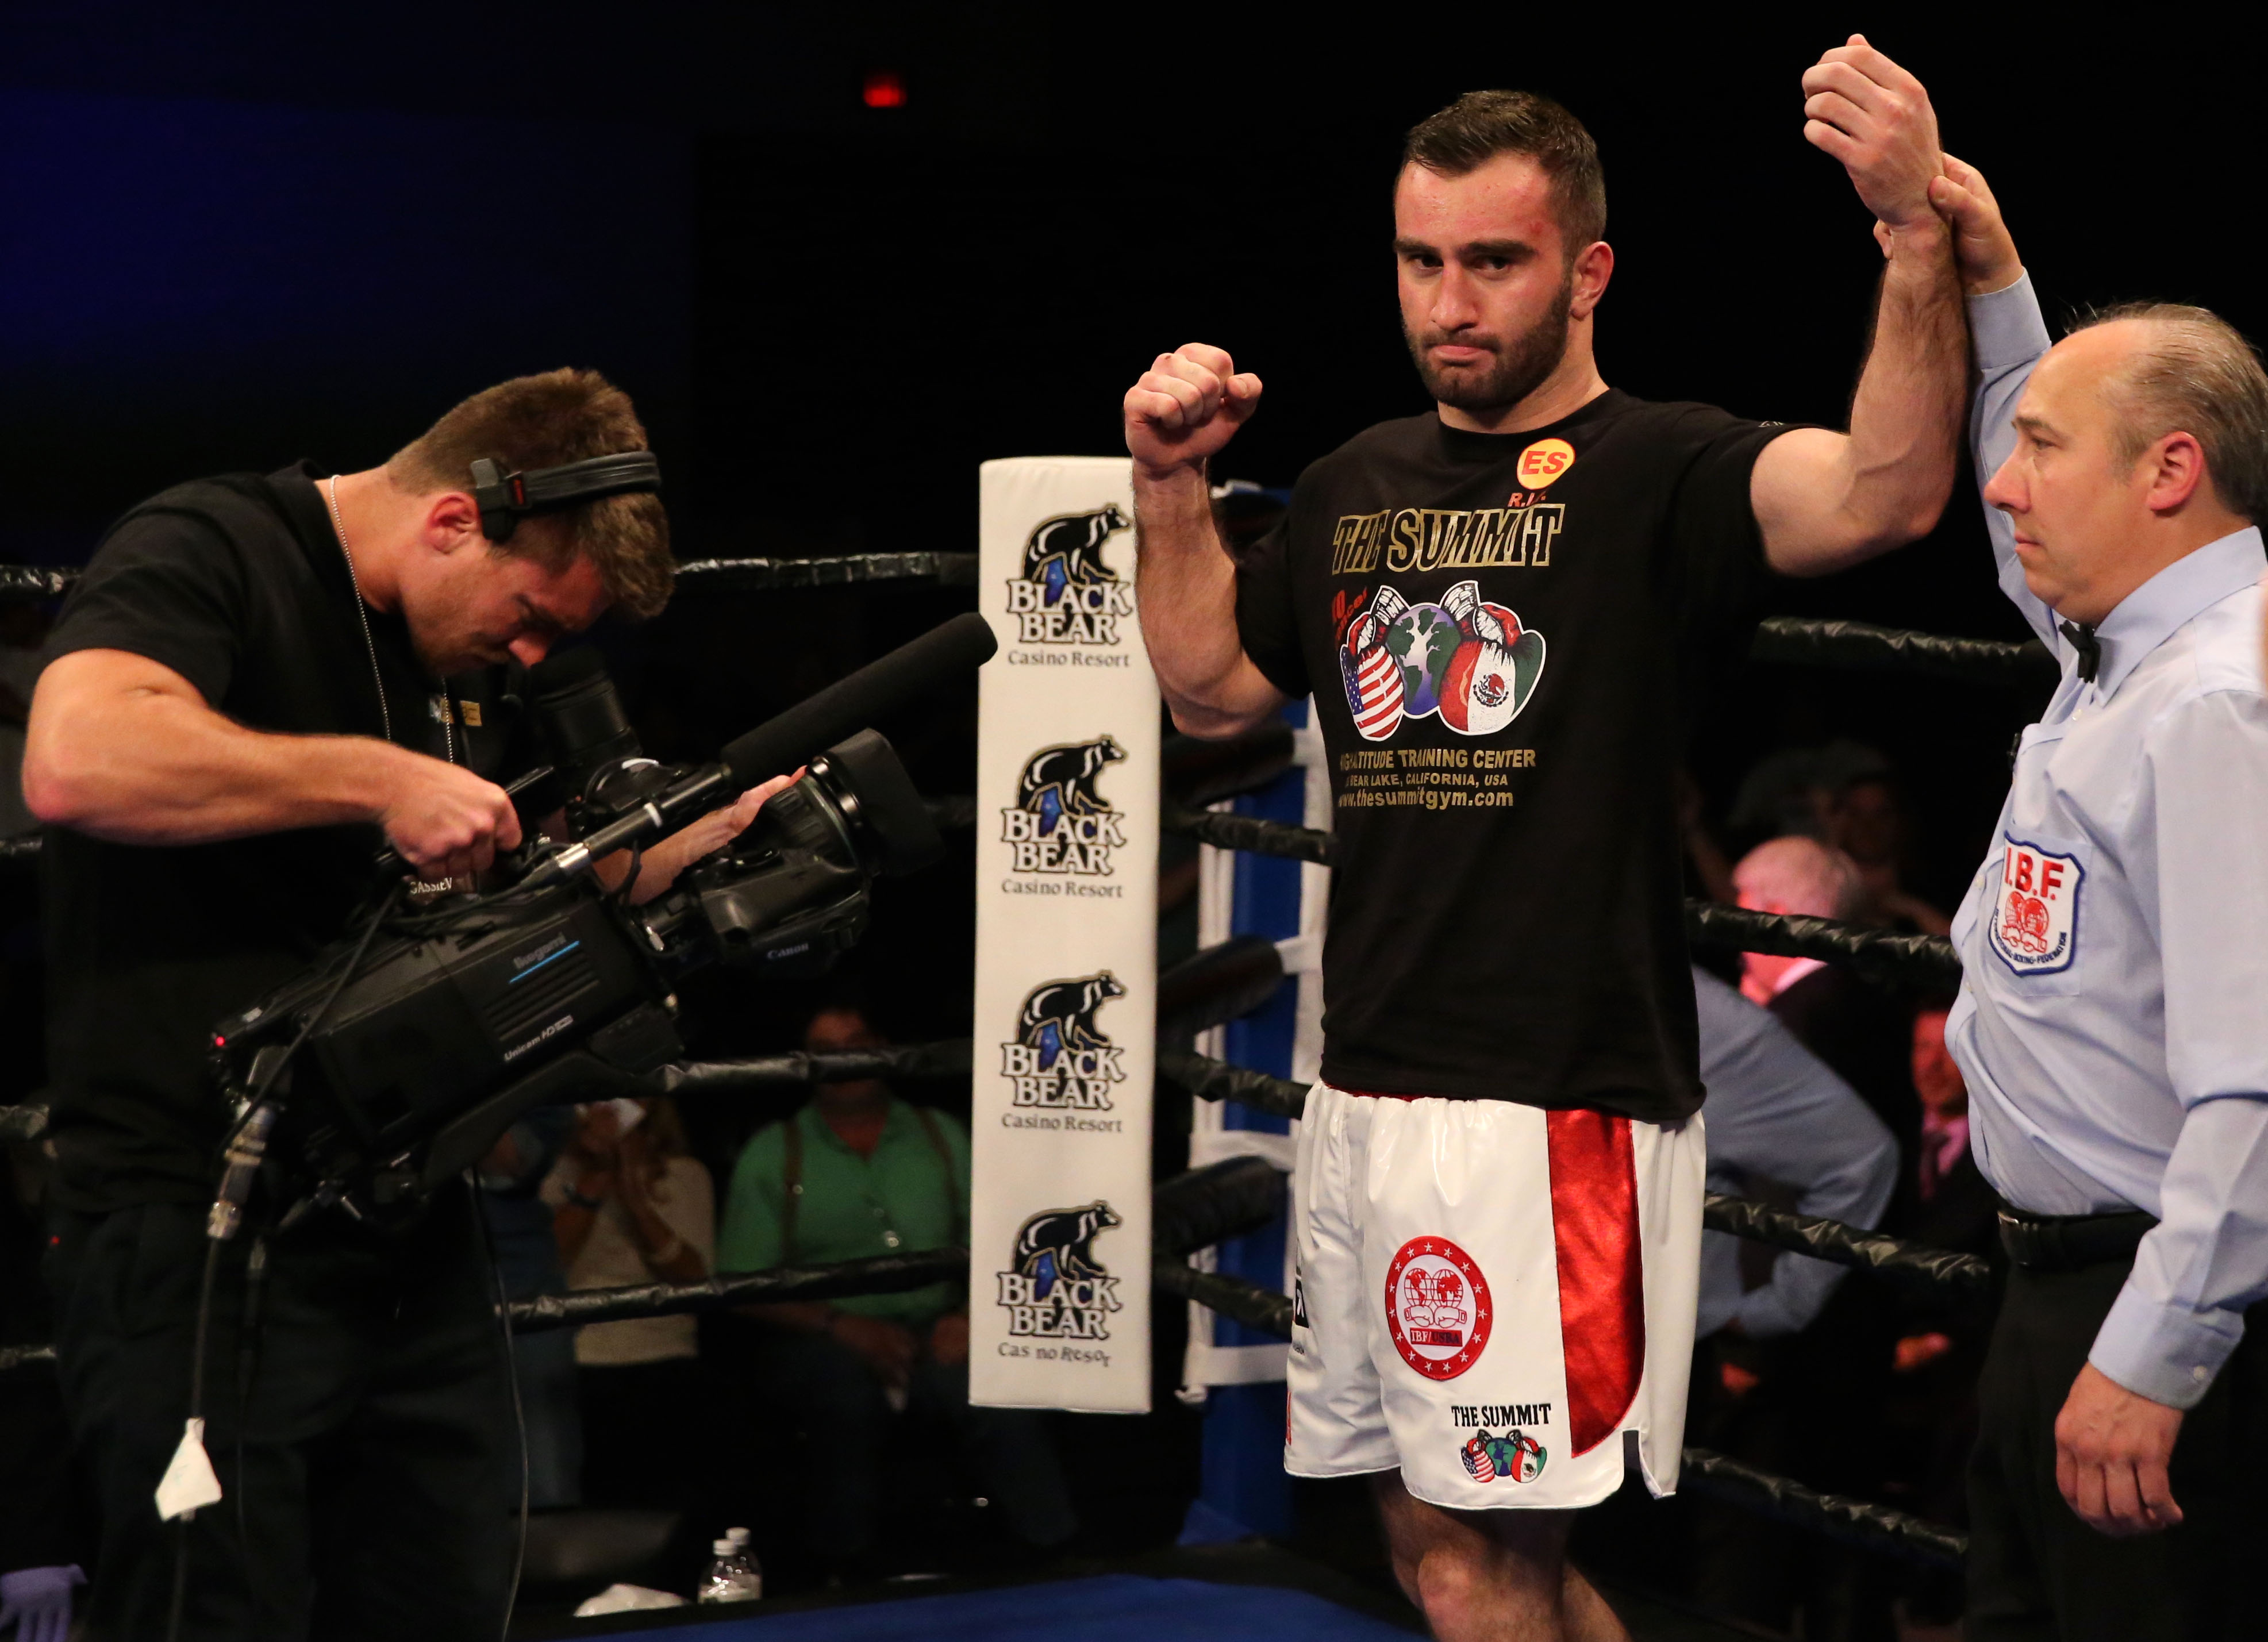 Photo credit: Andy Samuelson/Premier Boxing Champions